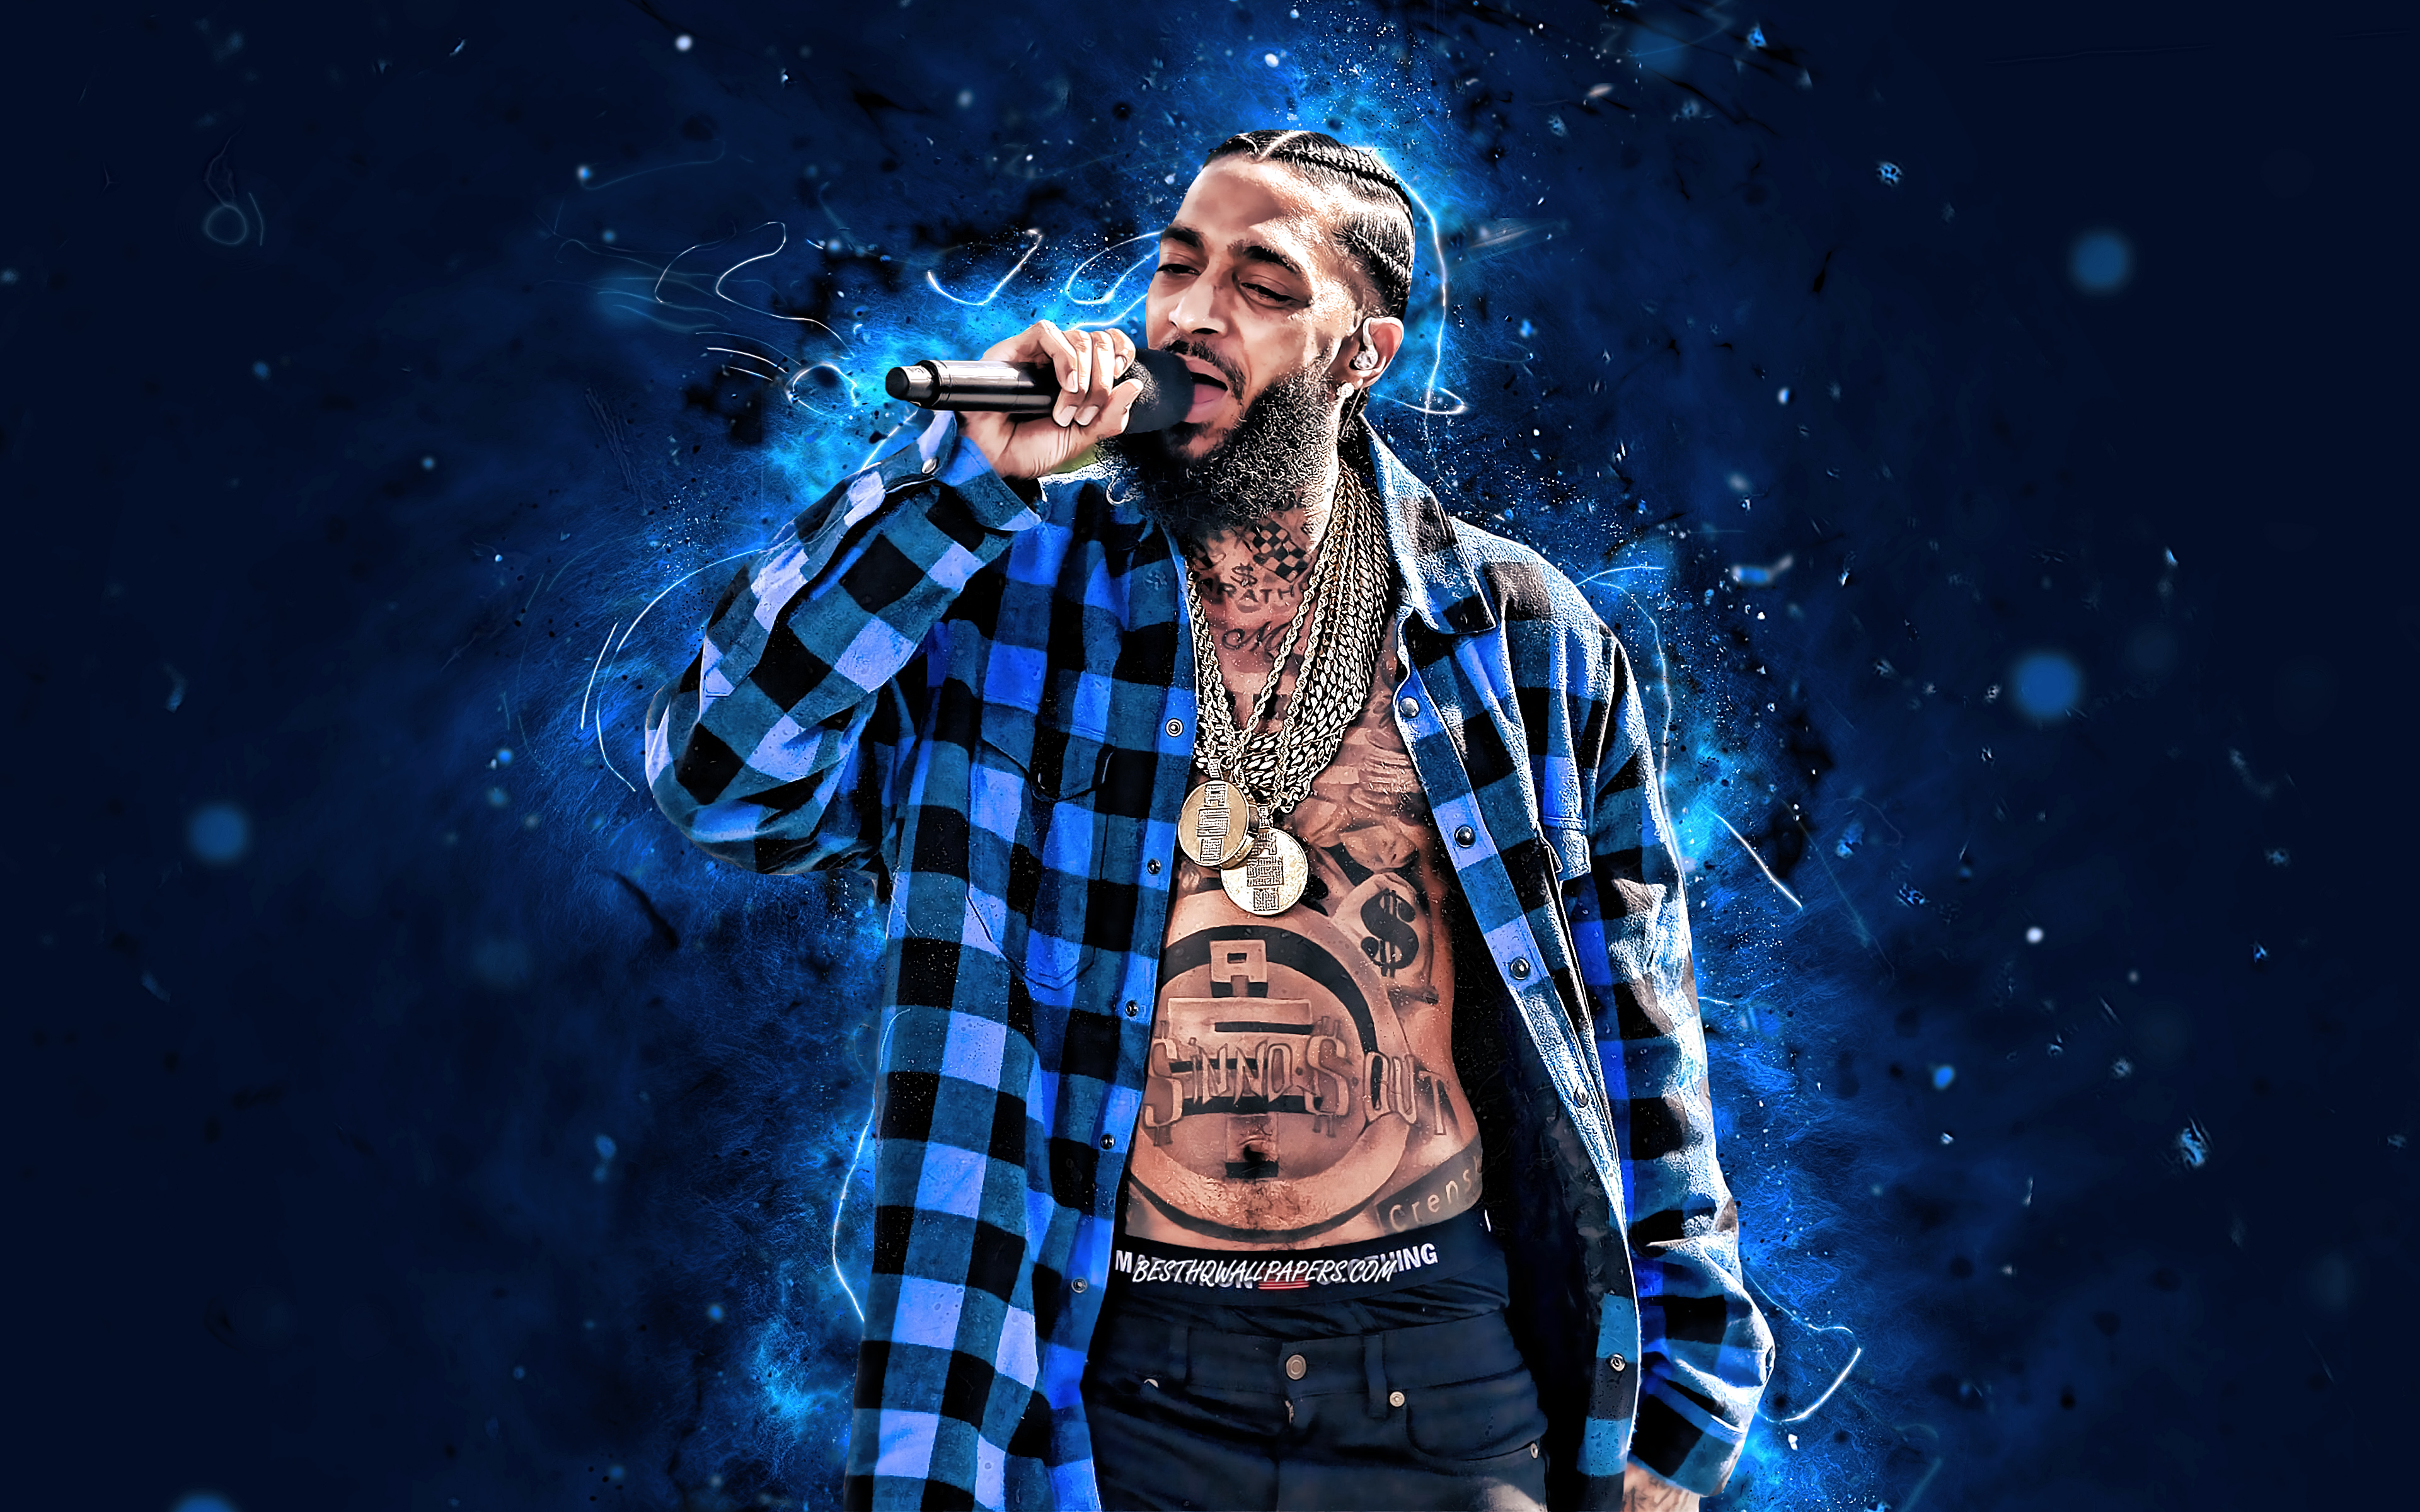 WUSOP Nipsey Hussle Wallpaper HD Canvas Art Poster and Wall Art Picture  Print Modern Family Room Decor Poster 08 x 12 Inches 20 x 30 cm   Amazoncouk Home  Kitchen